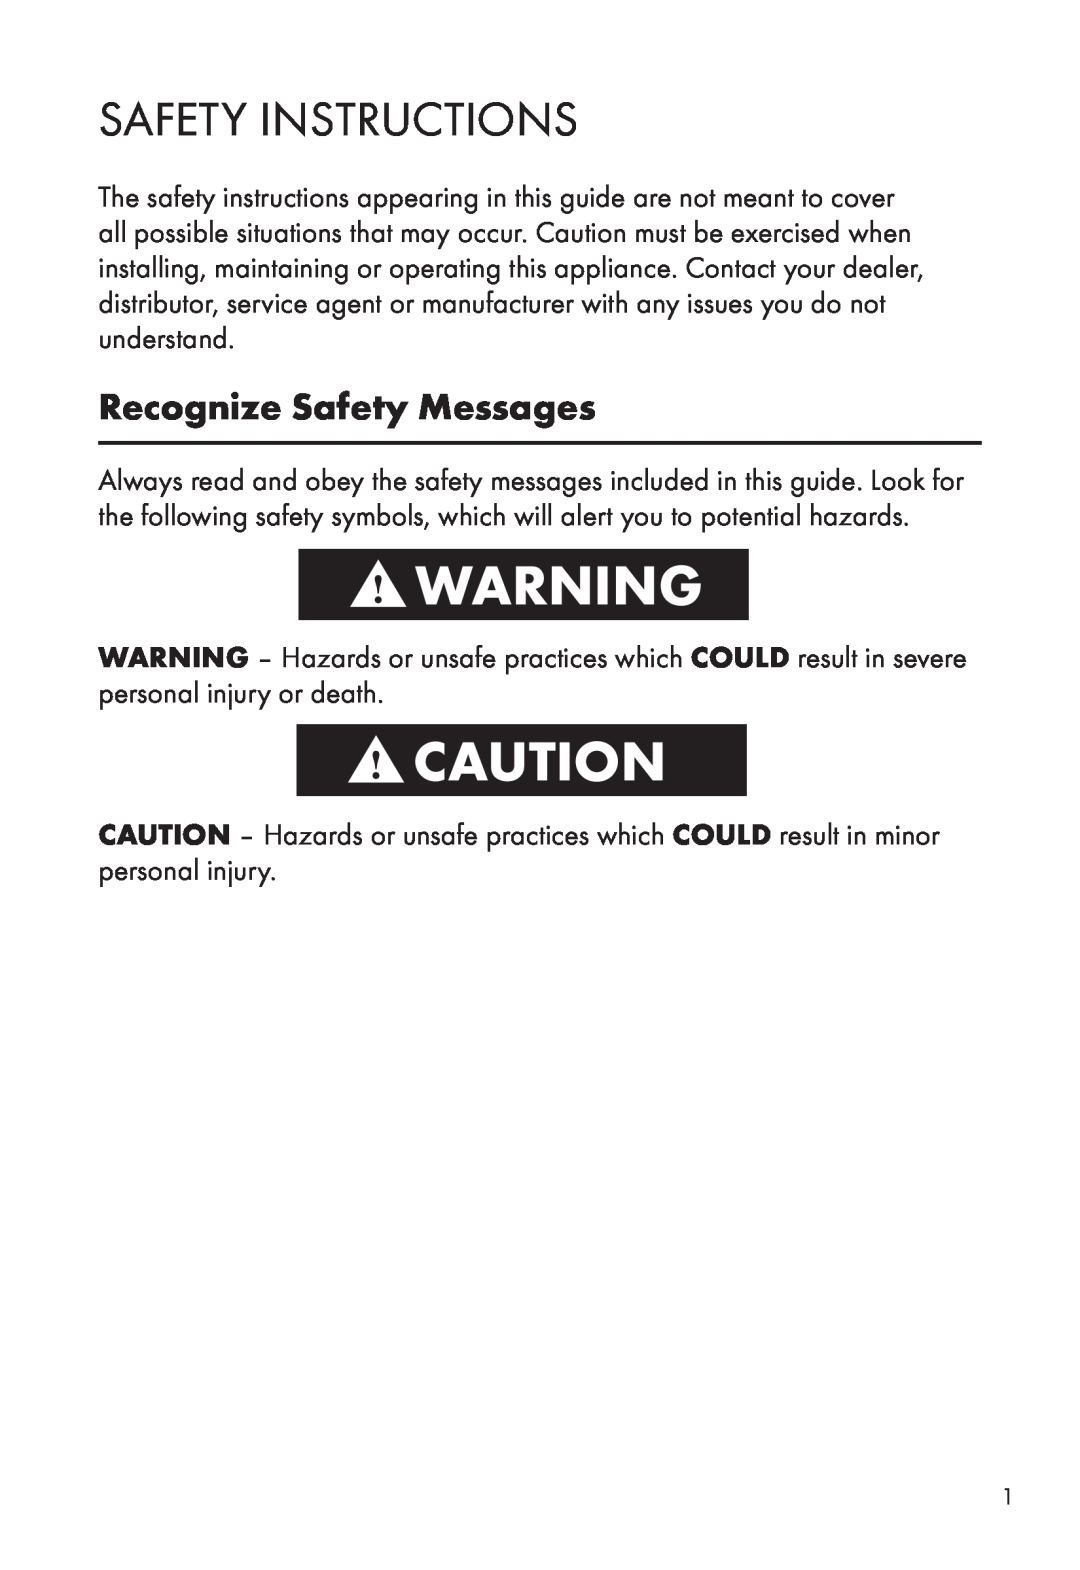 Calphalon ME2501B manual Safety Instructions, Recognize Safety Messages 